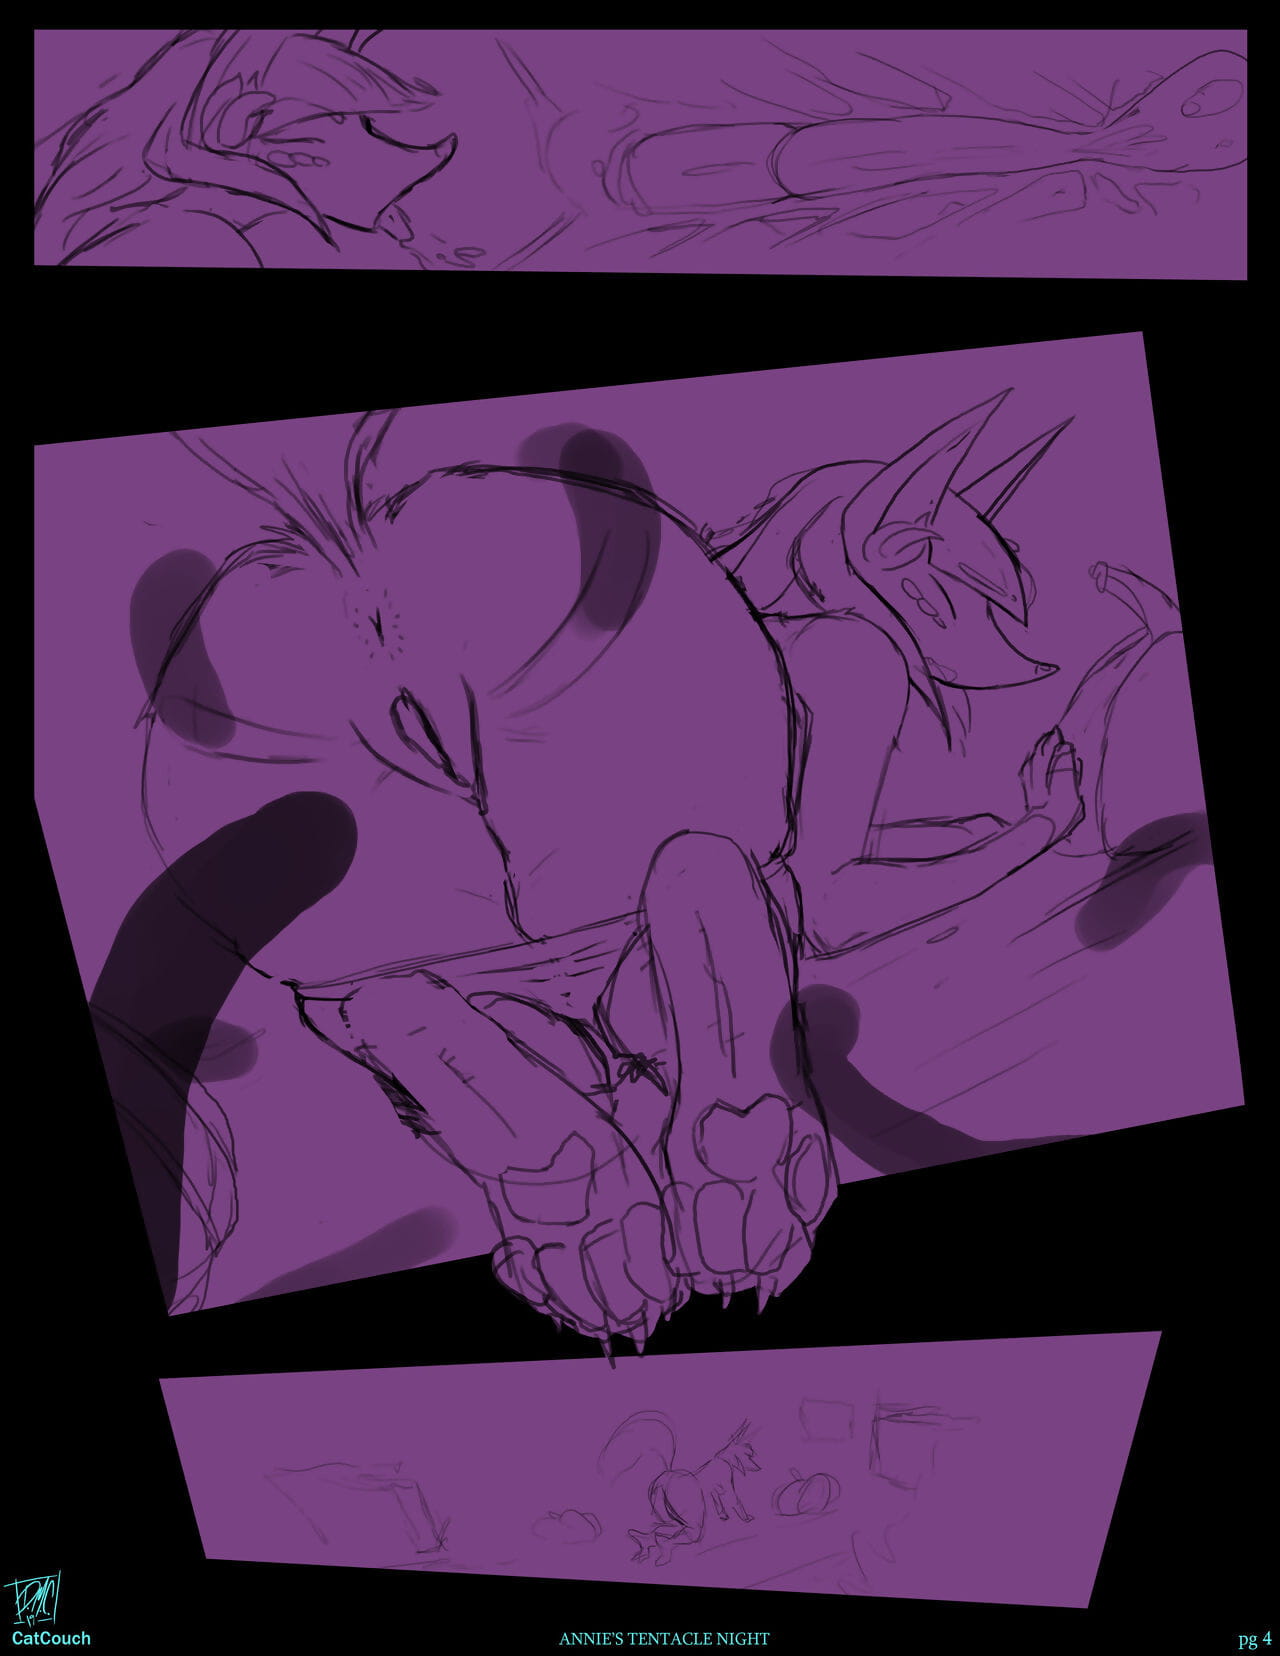 Annie Tentacle Night Comic page 1